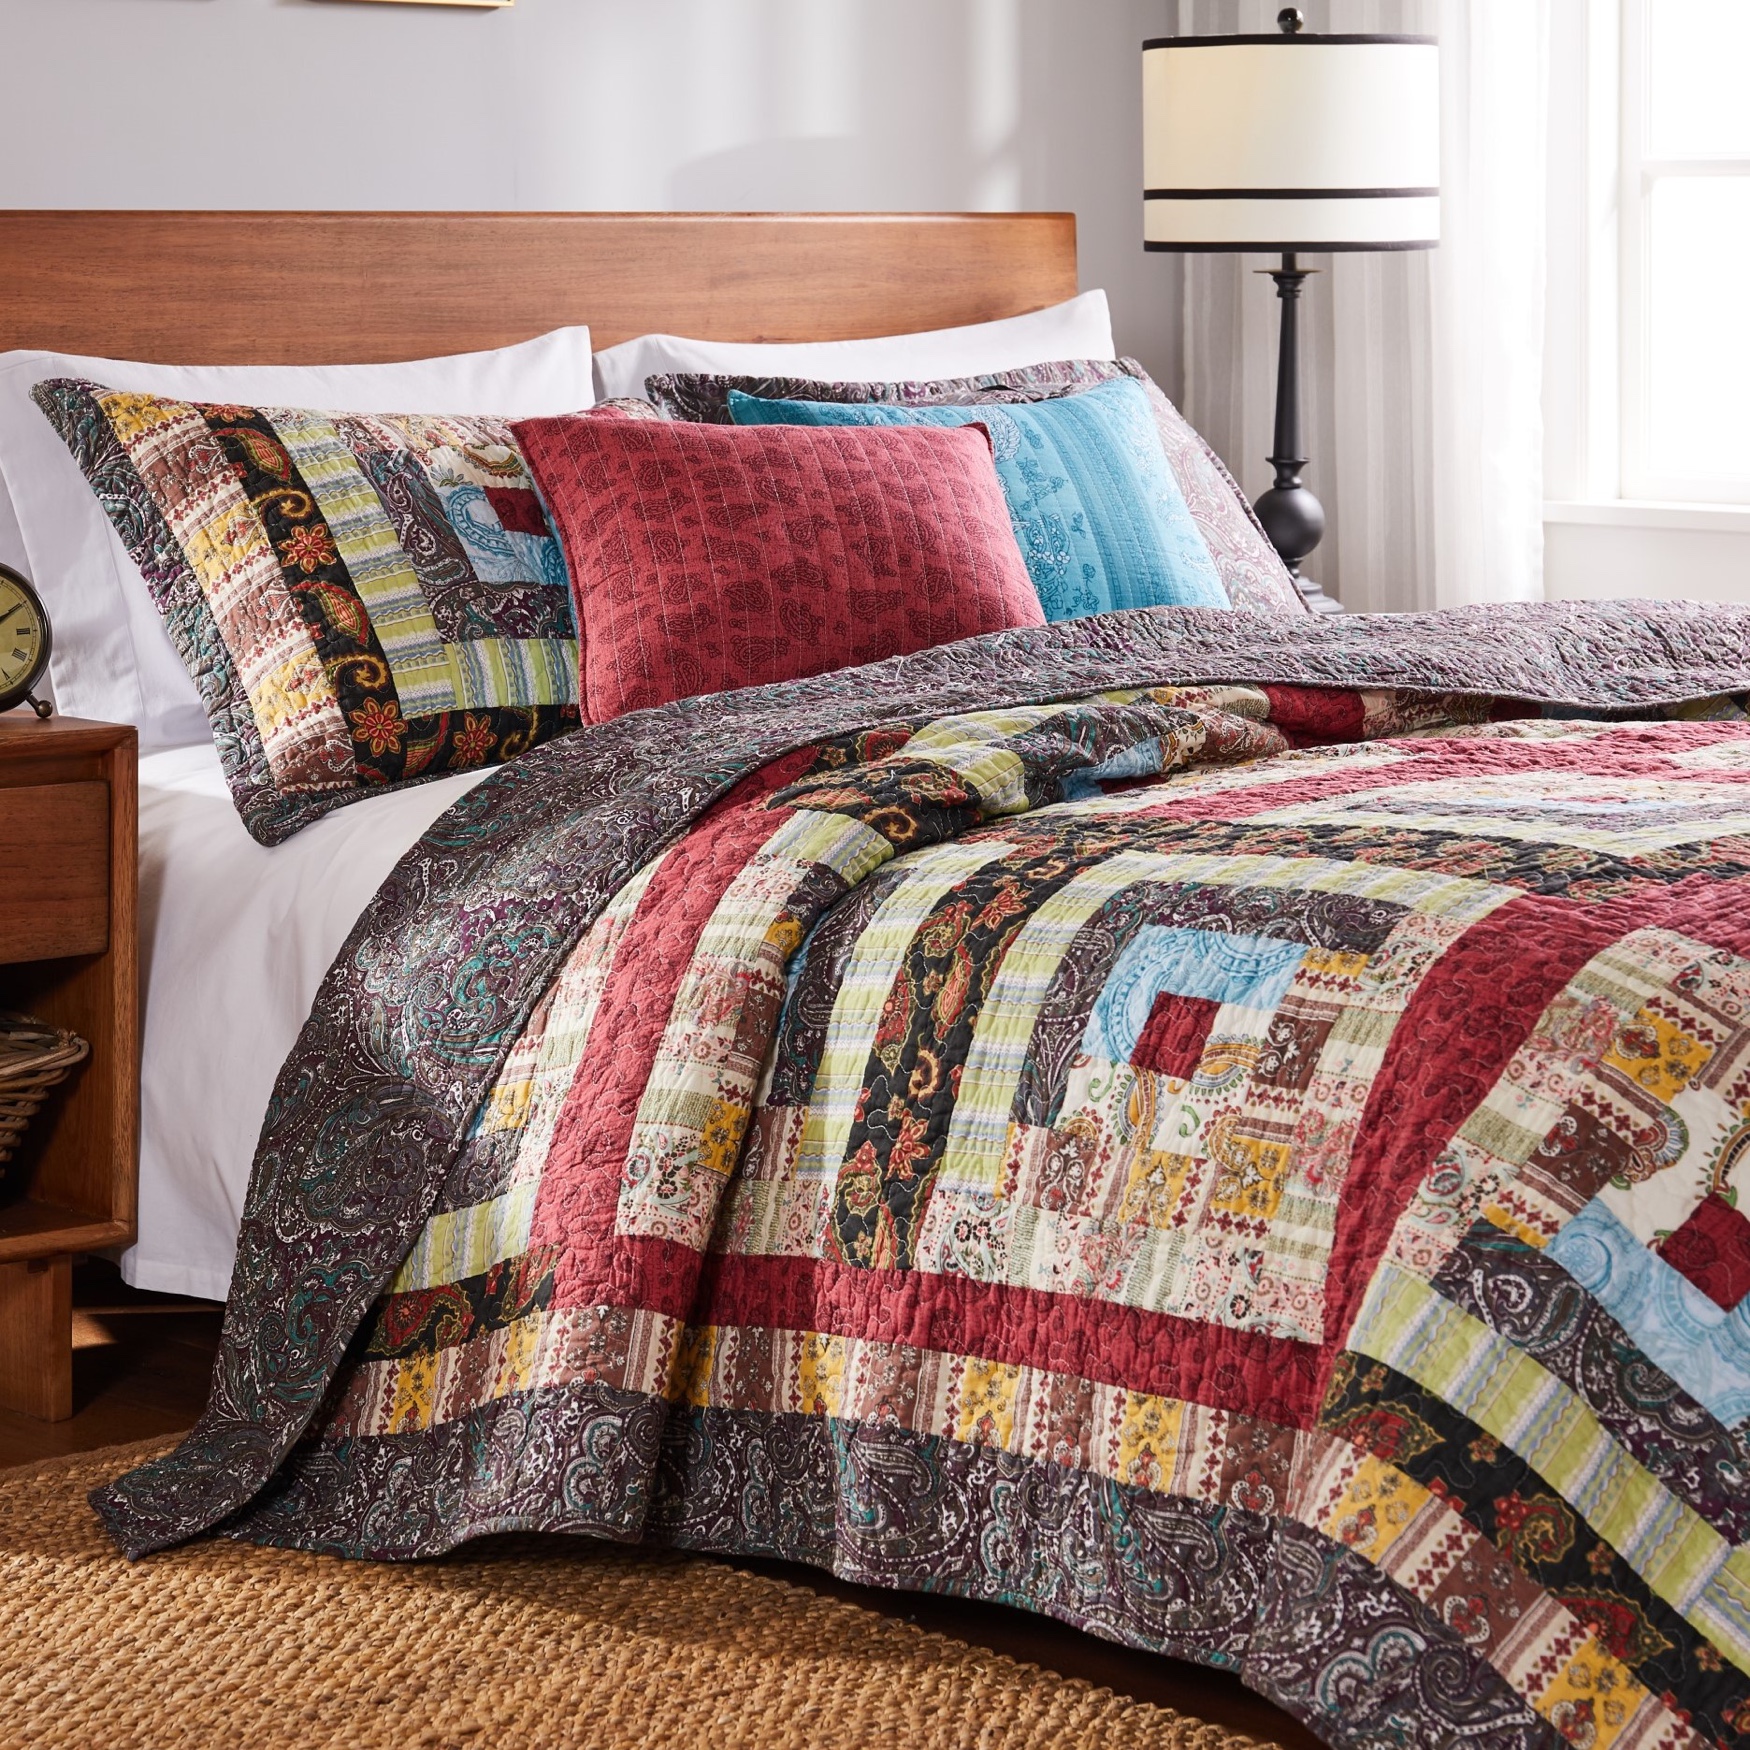 Colorado Lodge Quilt Set Greenland Home Fashions | Fullbeauty Outlet